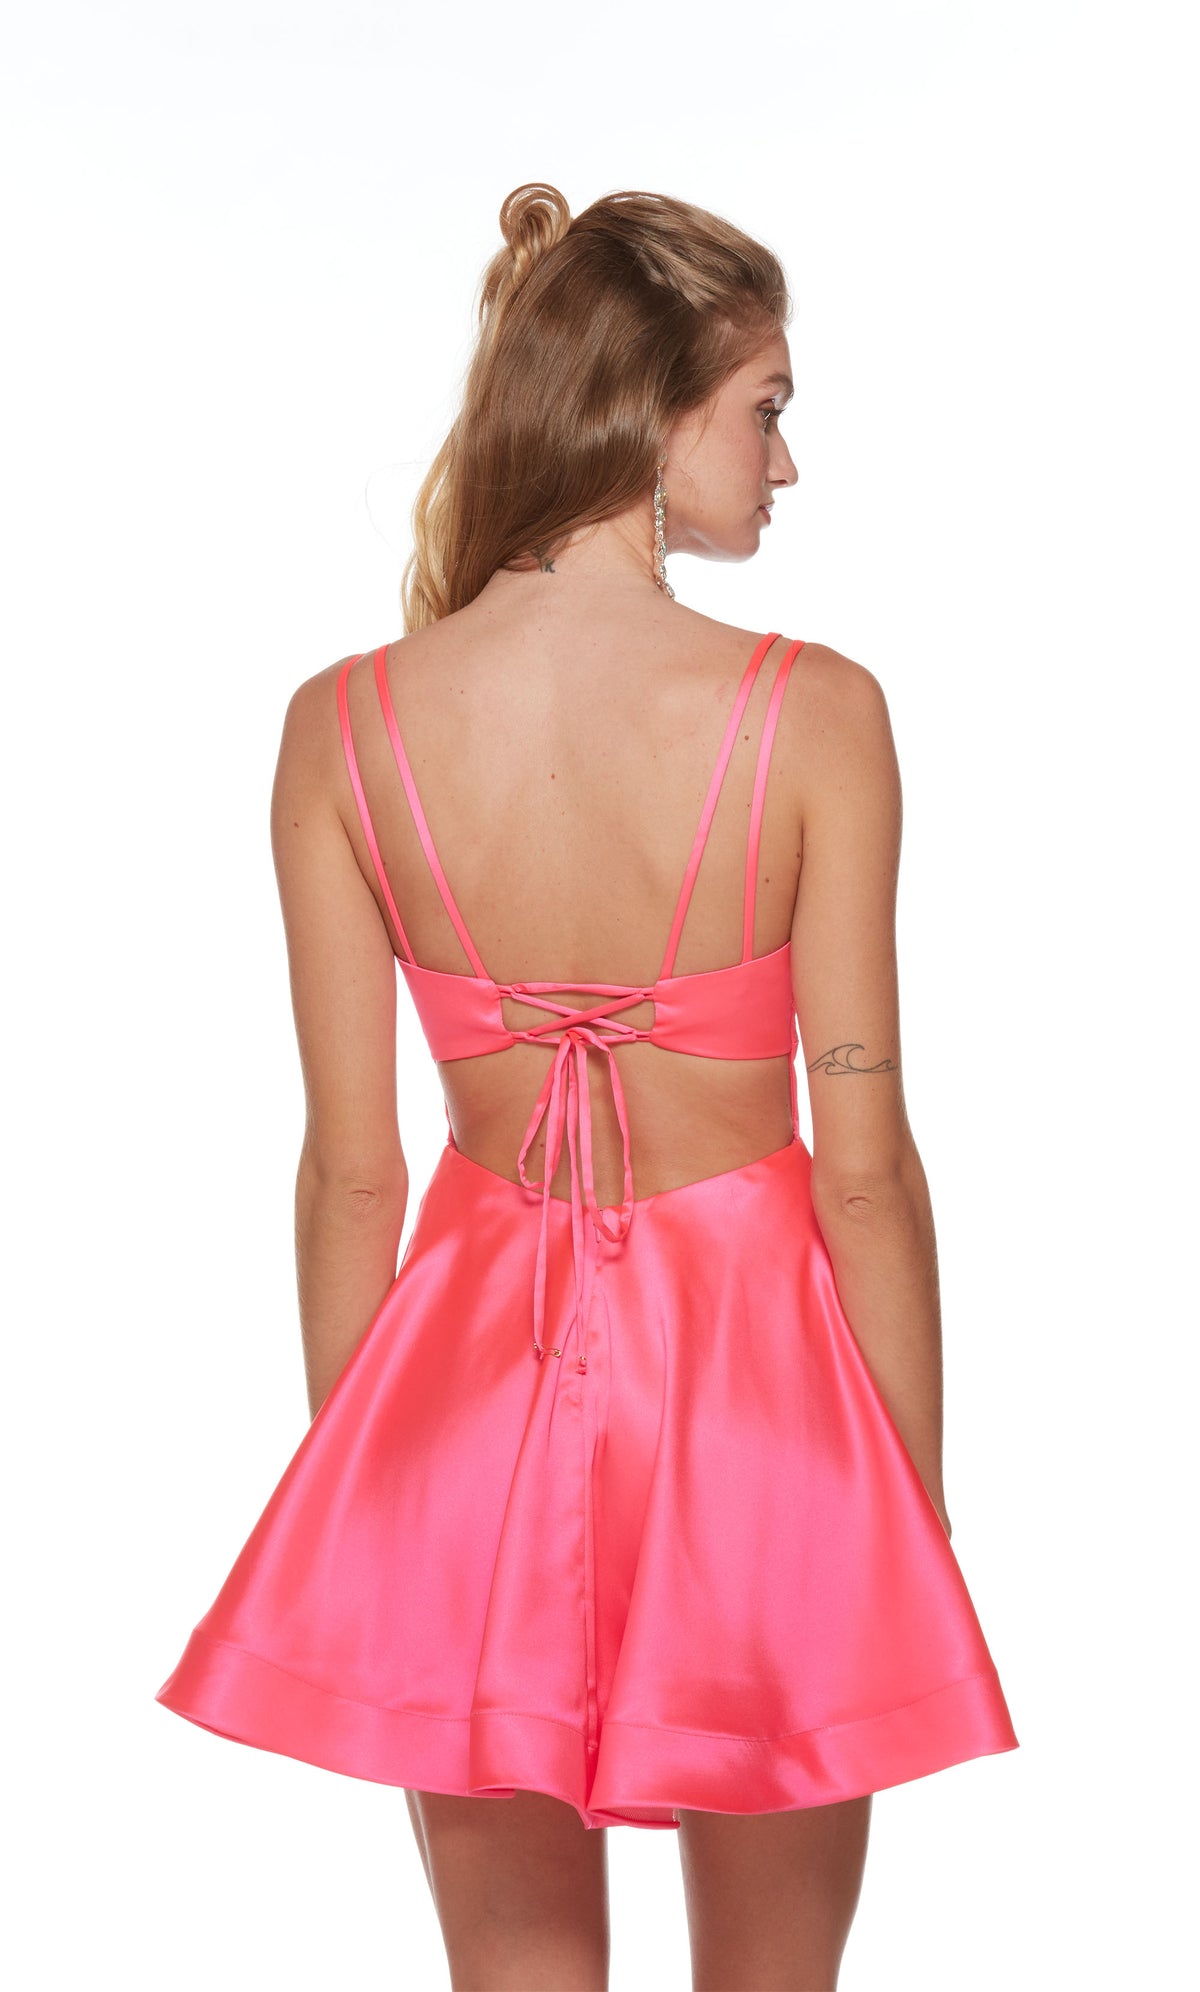 A V-neck, short satin homecoming dress with double spaghetti straps and a strappy, lace-up back in the color barbie pink.